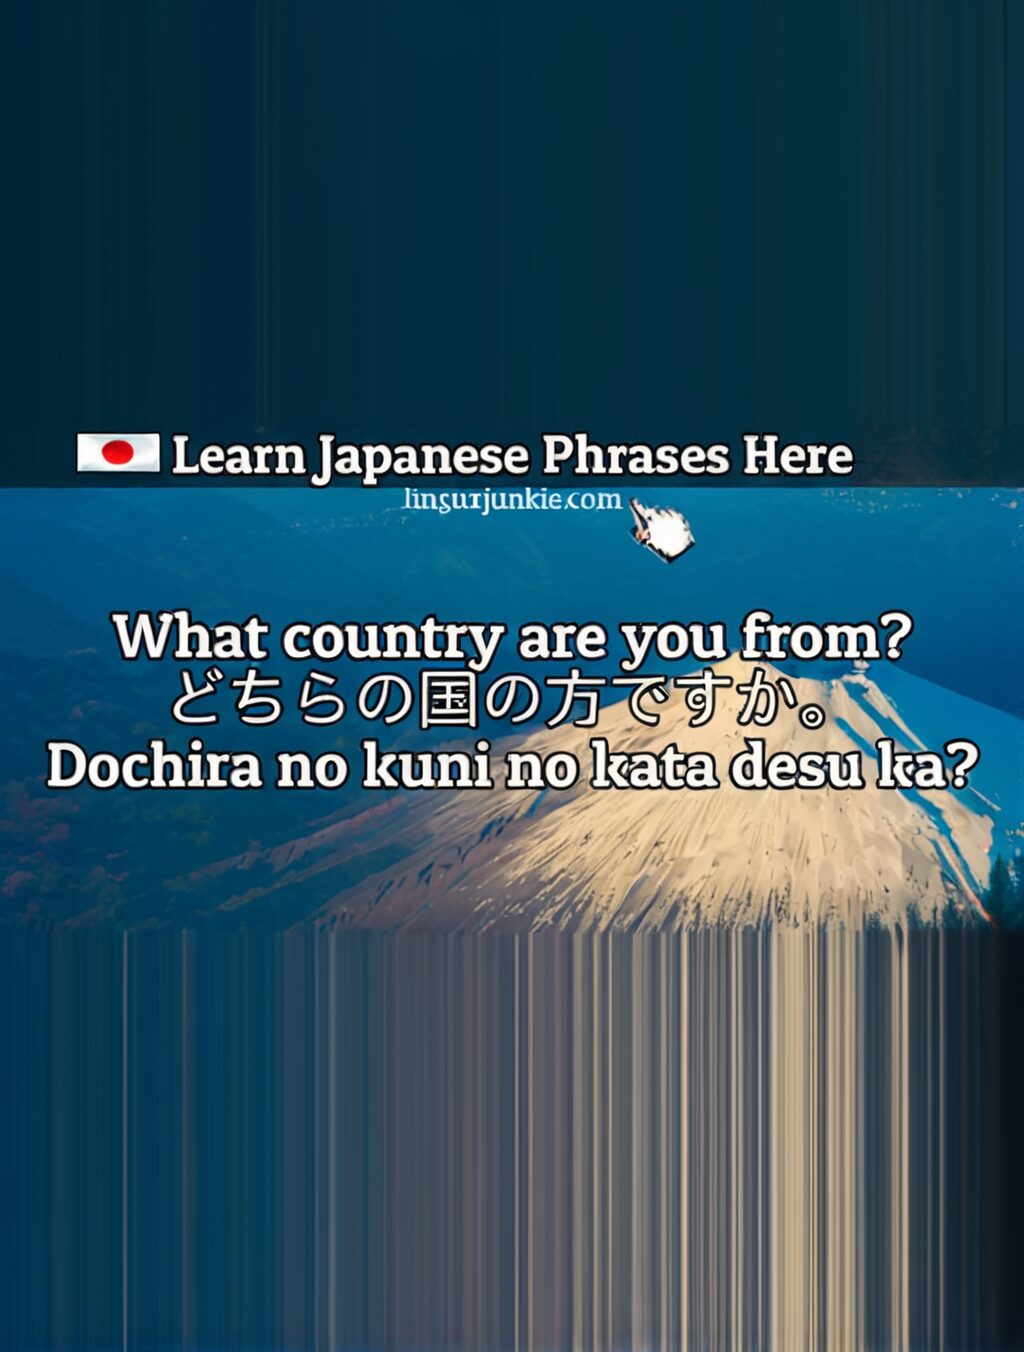 where are you from in japan